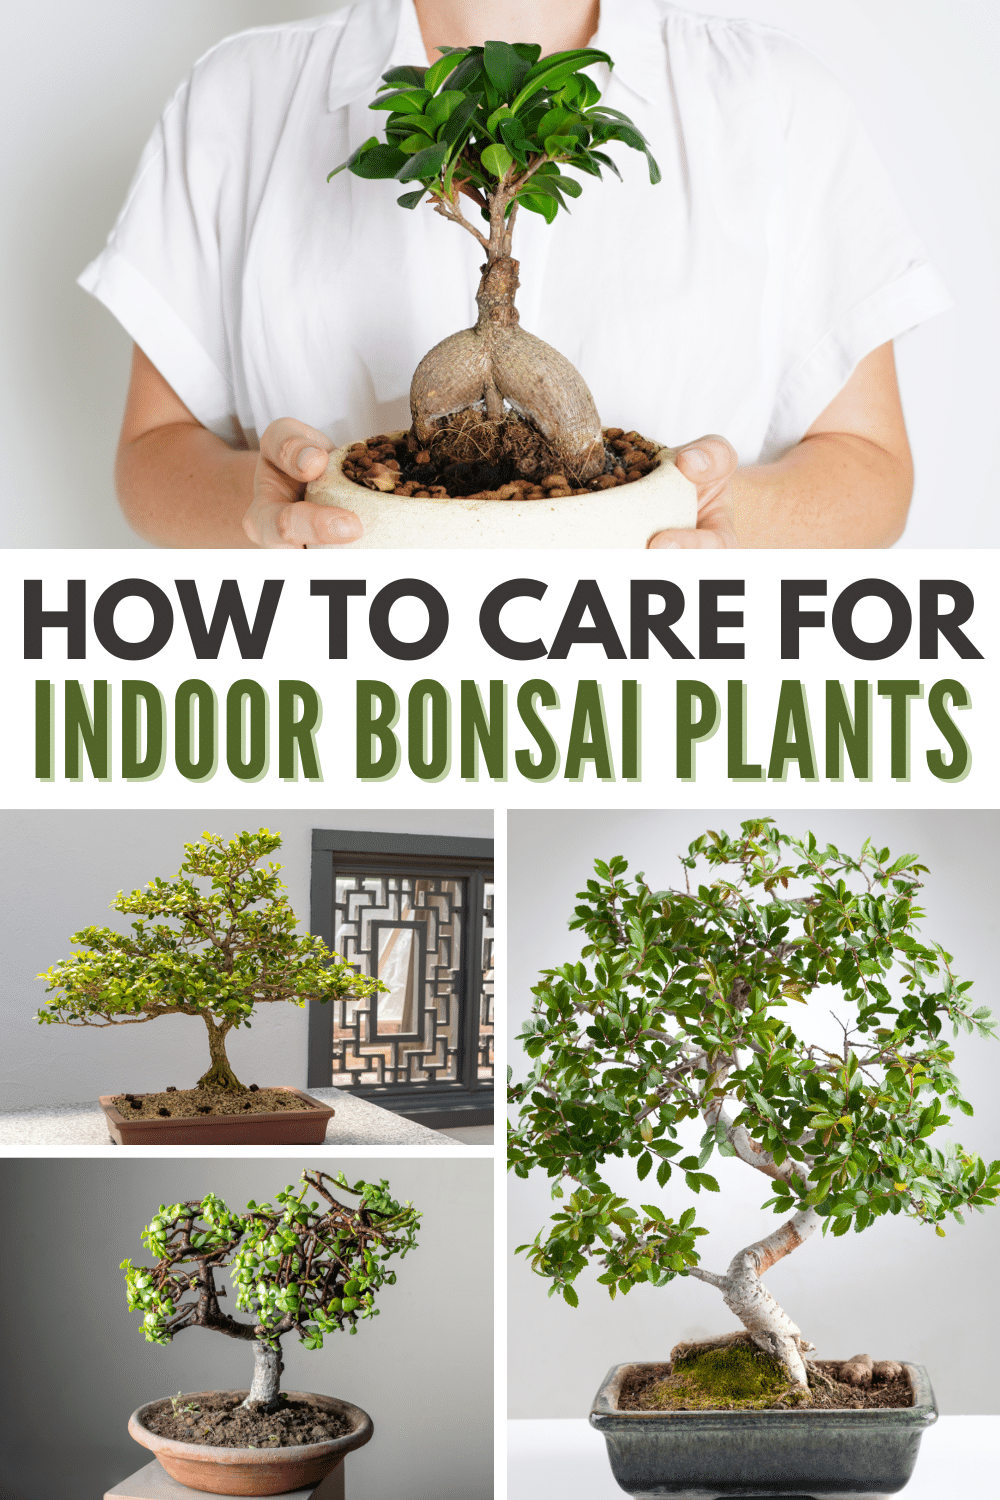 Care for indoor bonsai plants.